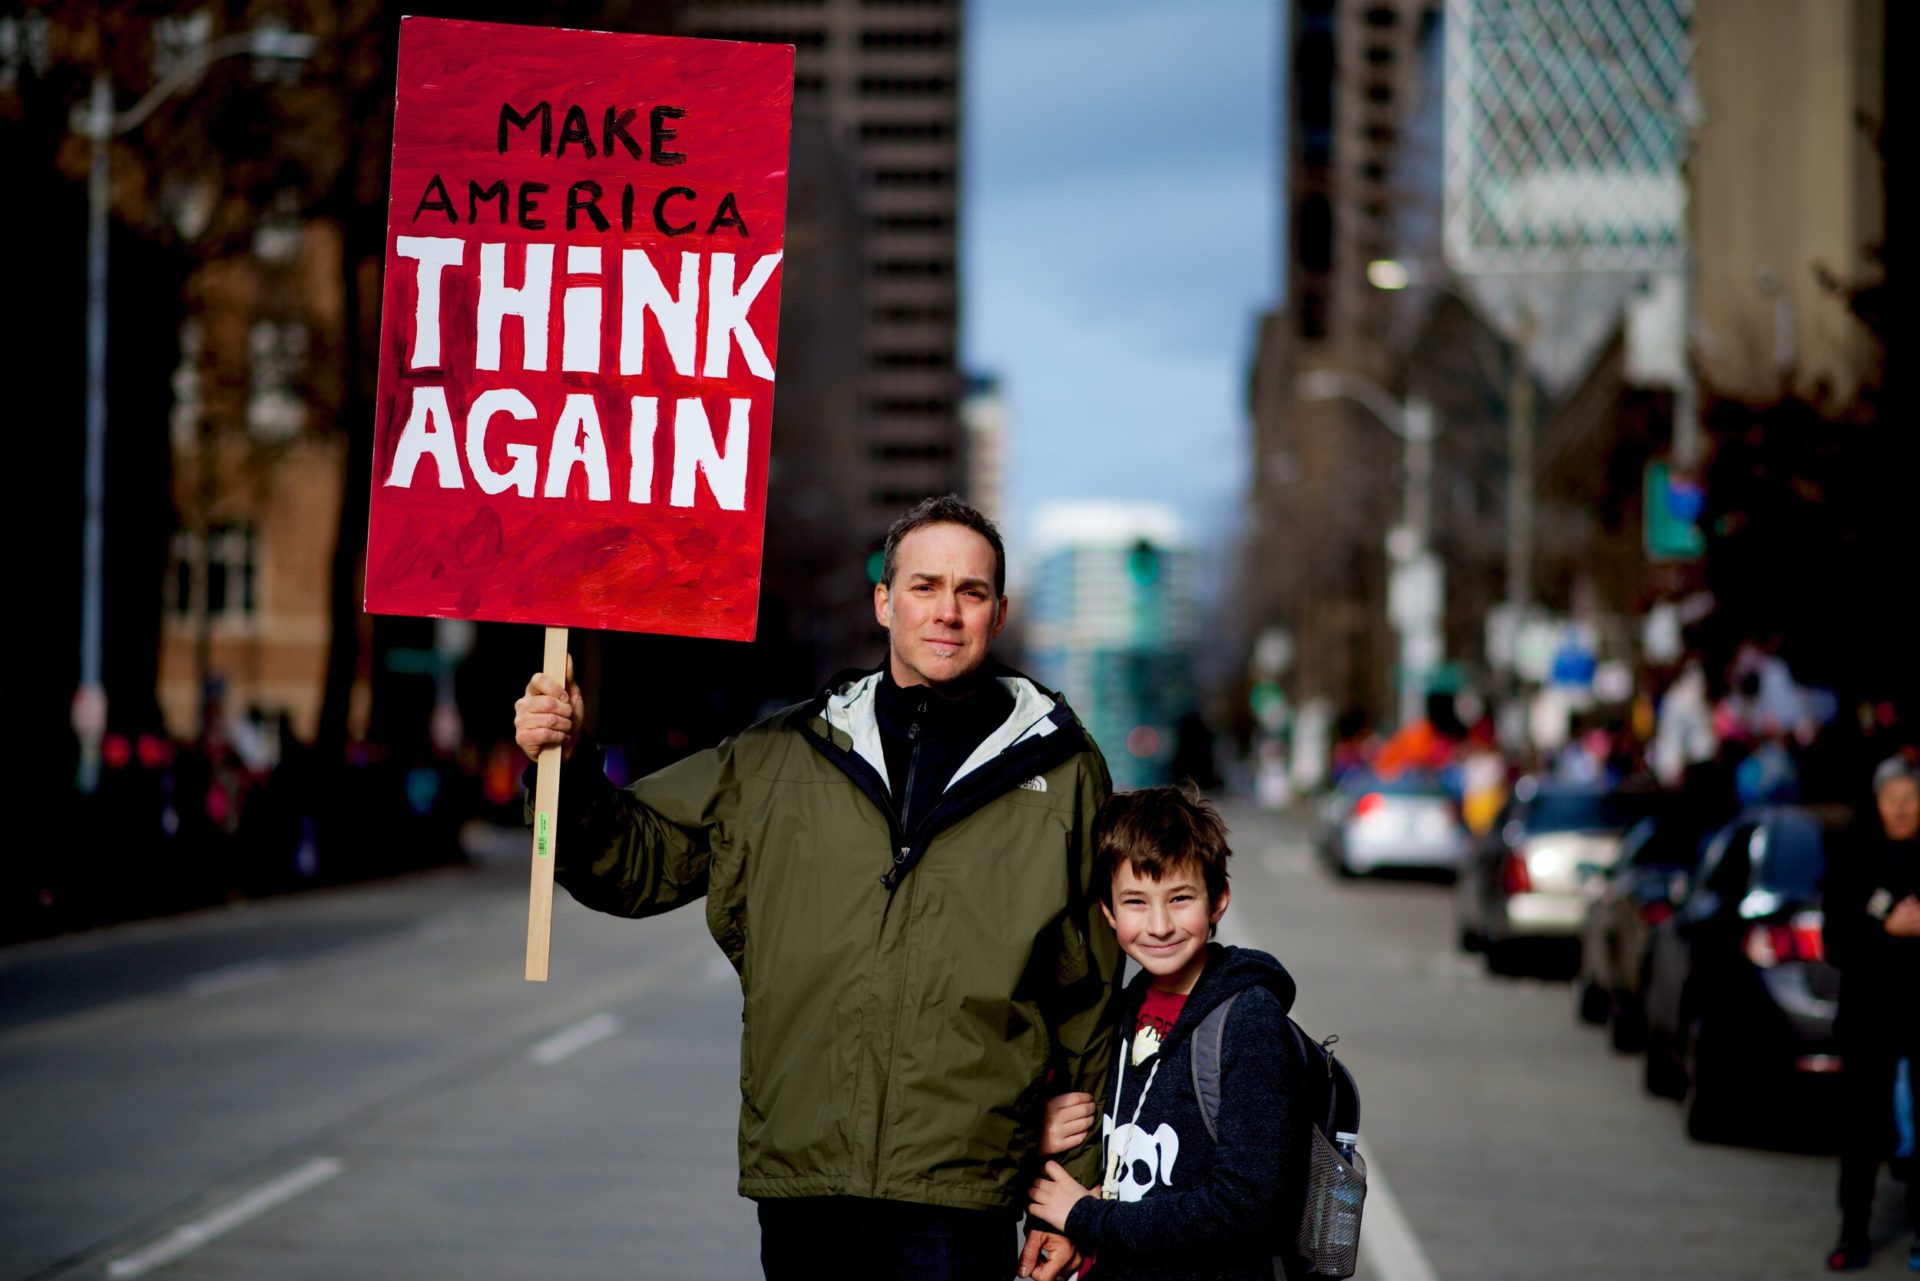 A father and son protest in Seattle, WA. USA. (Photo by Jose M., Unsplash)